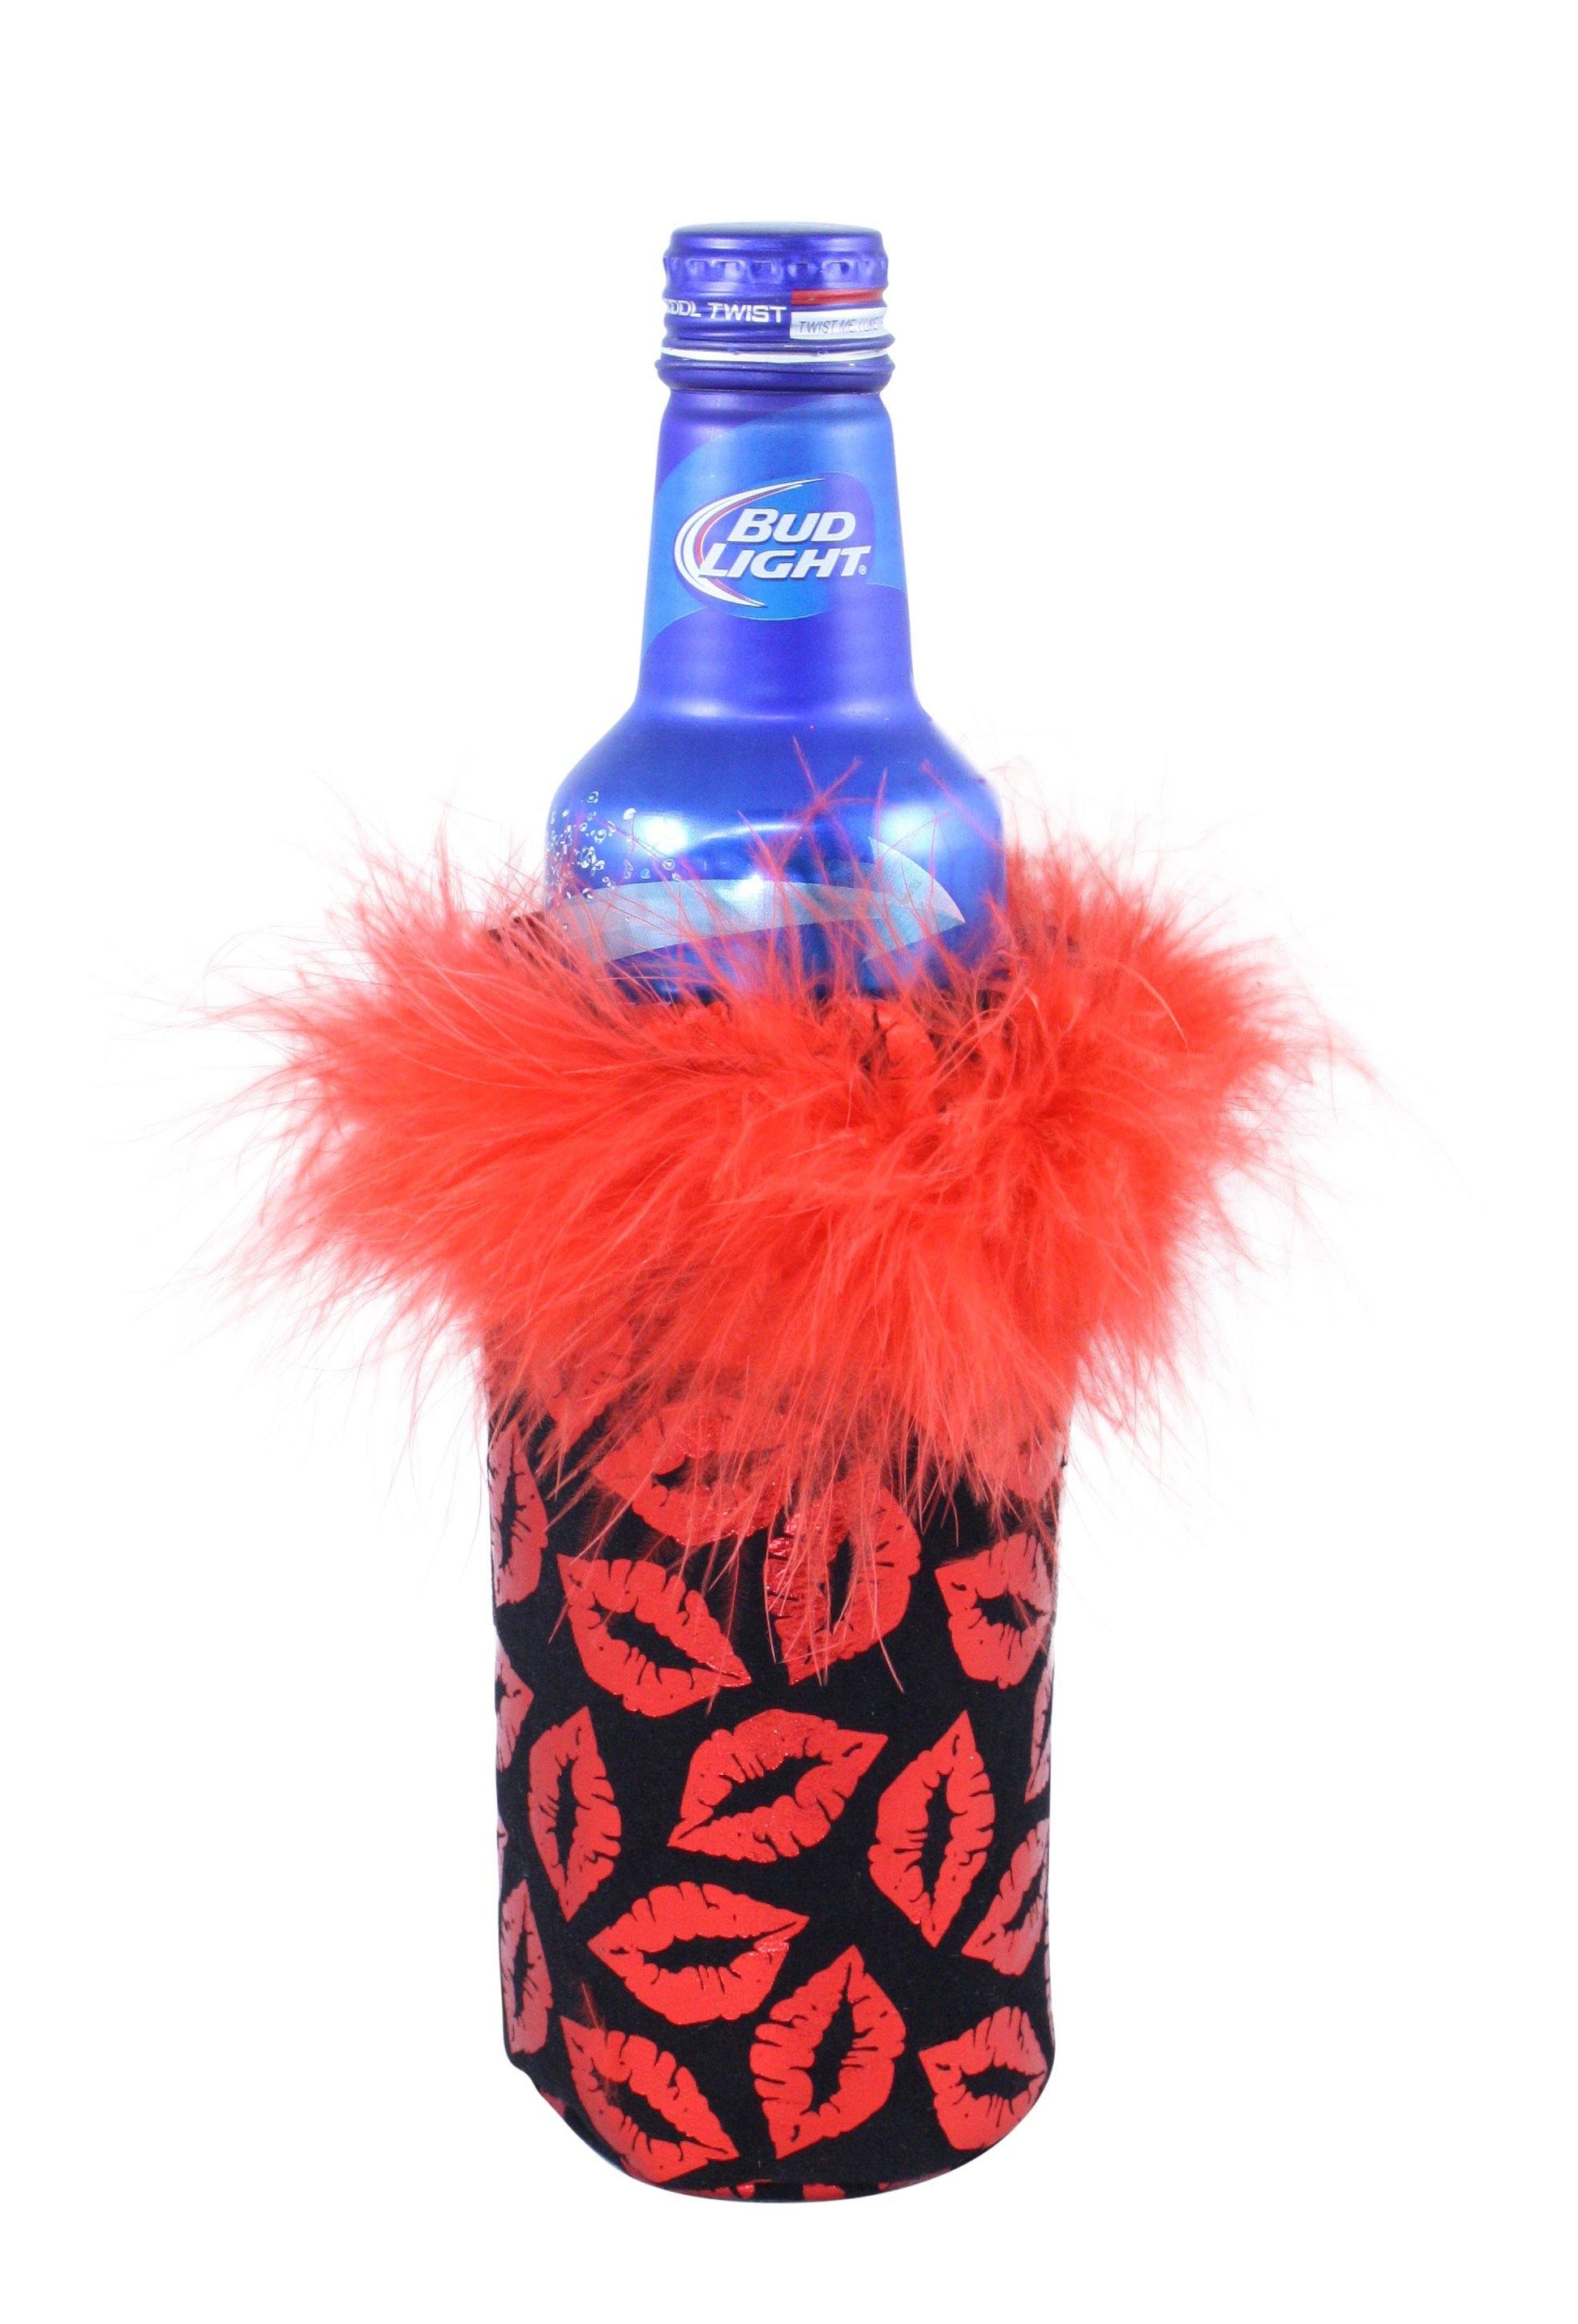 Awesome Festival Beer Holder by Tipsy Totes - holds most 20oz Aluminum Beers!